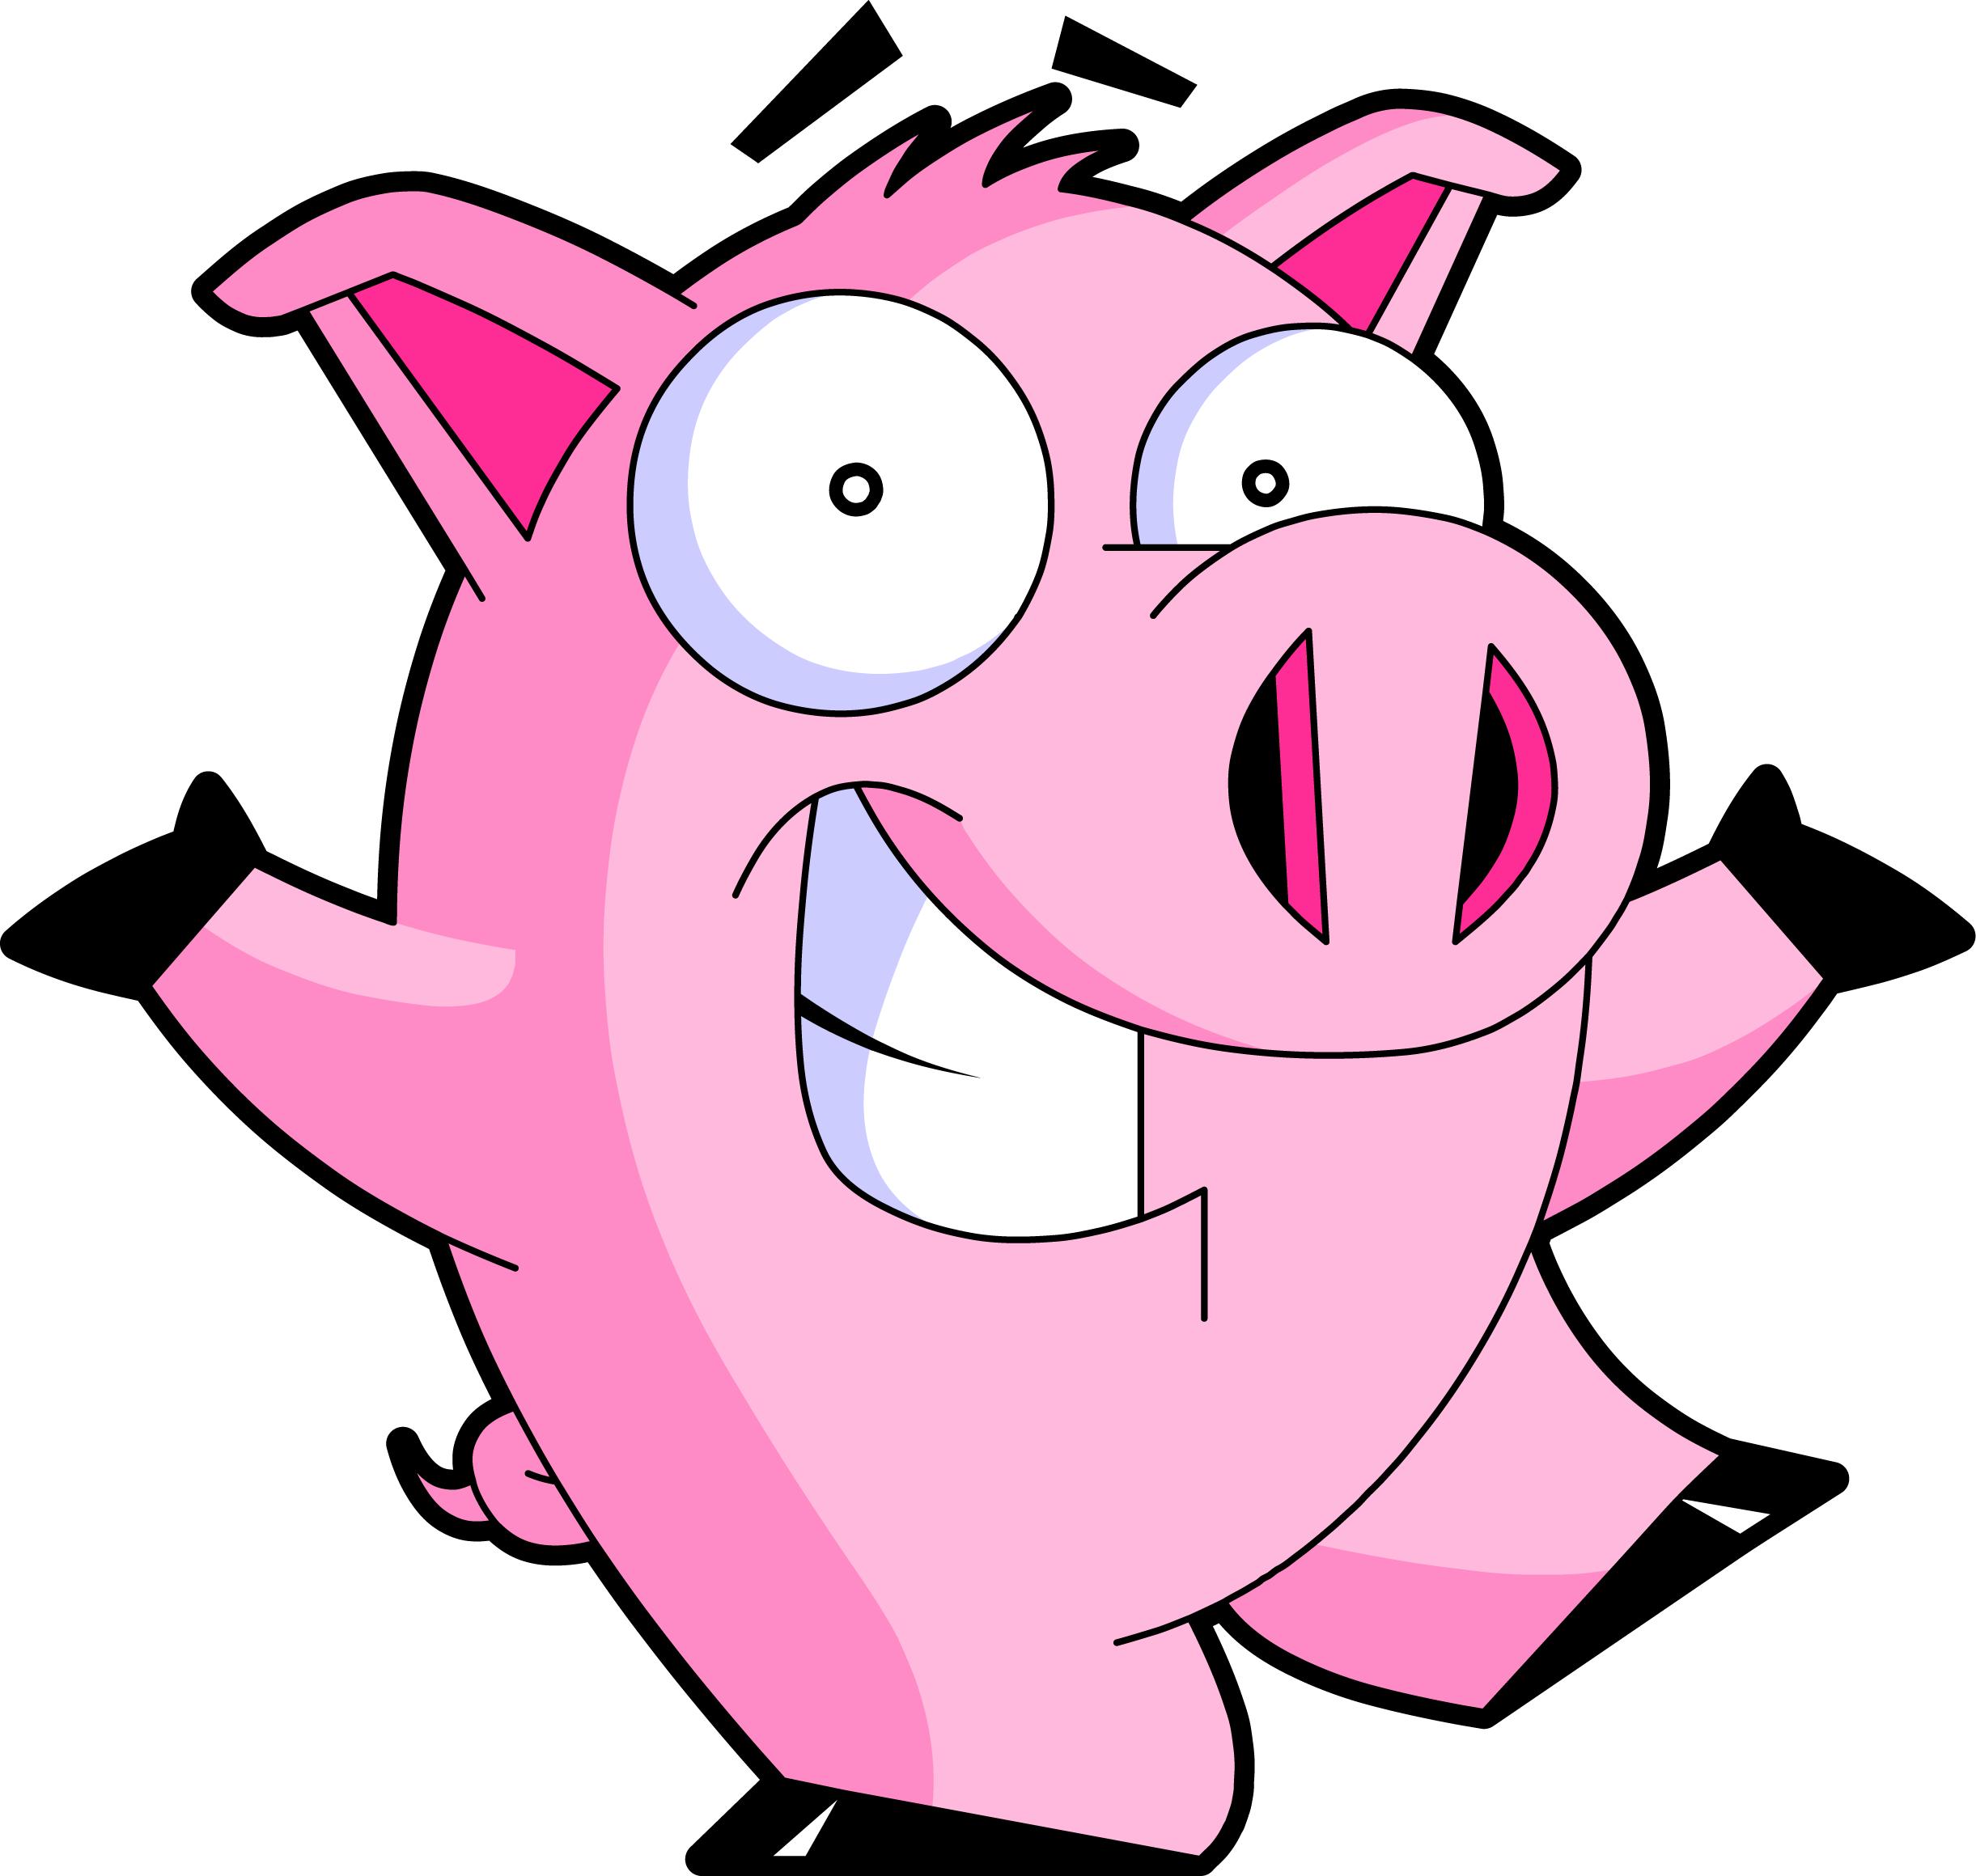 Pictures Of Animated Pigs - Clipart library 